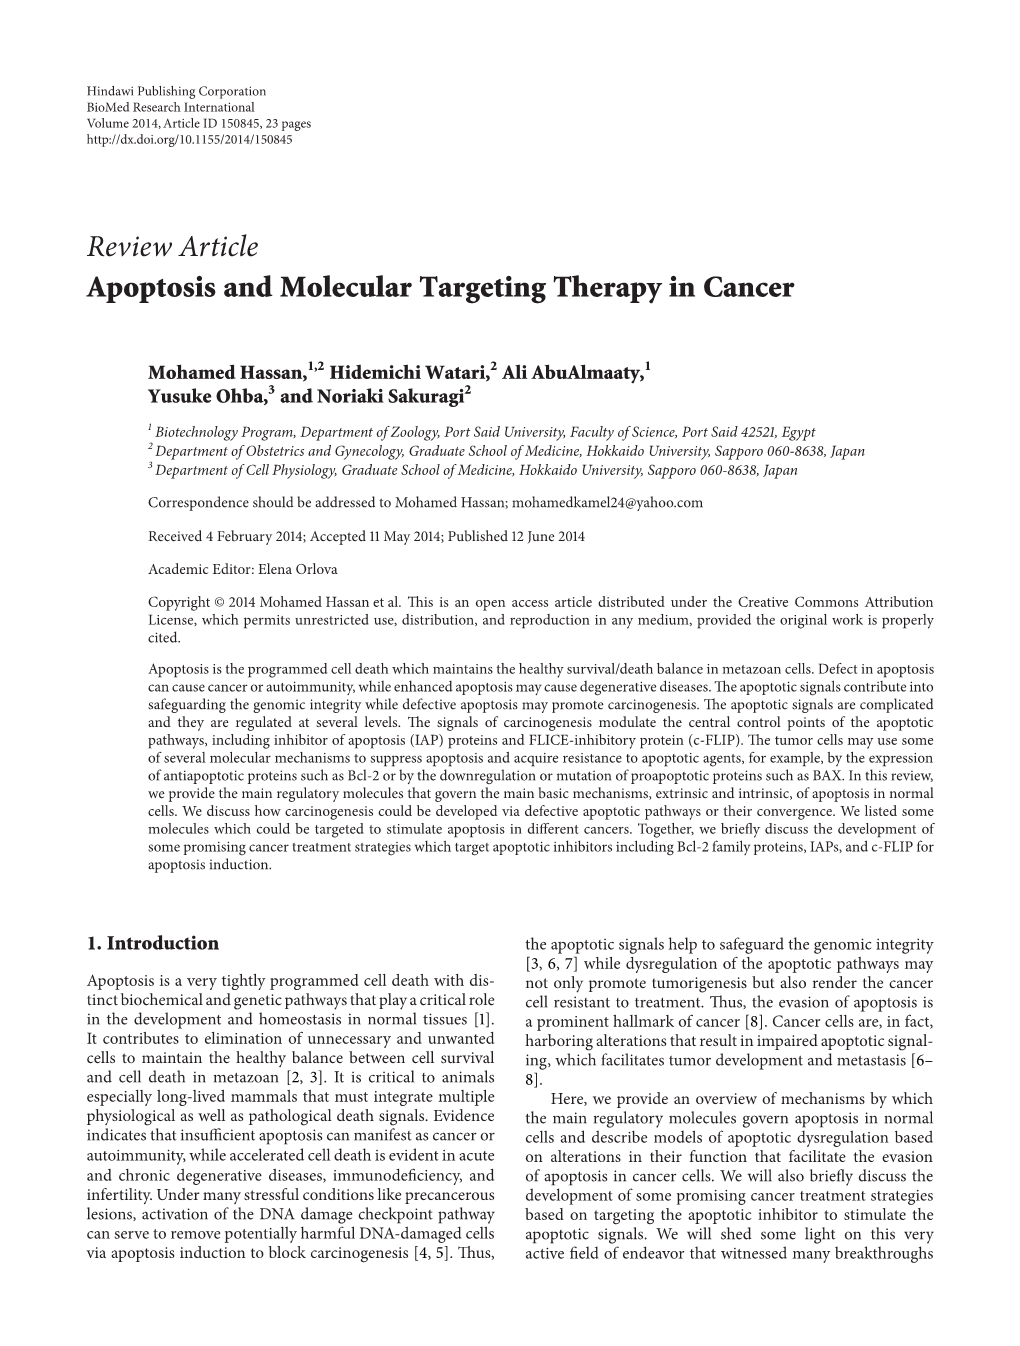 Review Article Apoptosis and Molecular Targeting Therapy in Cancer